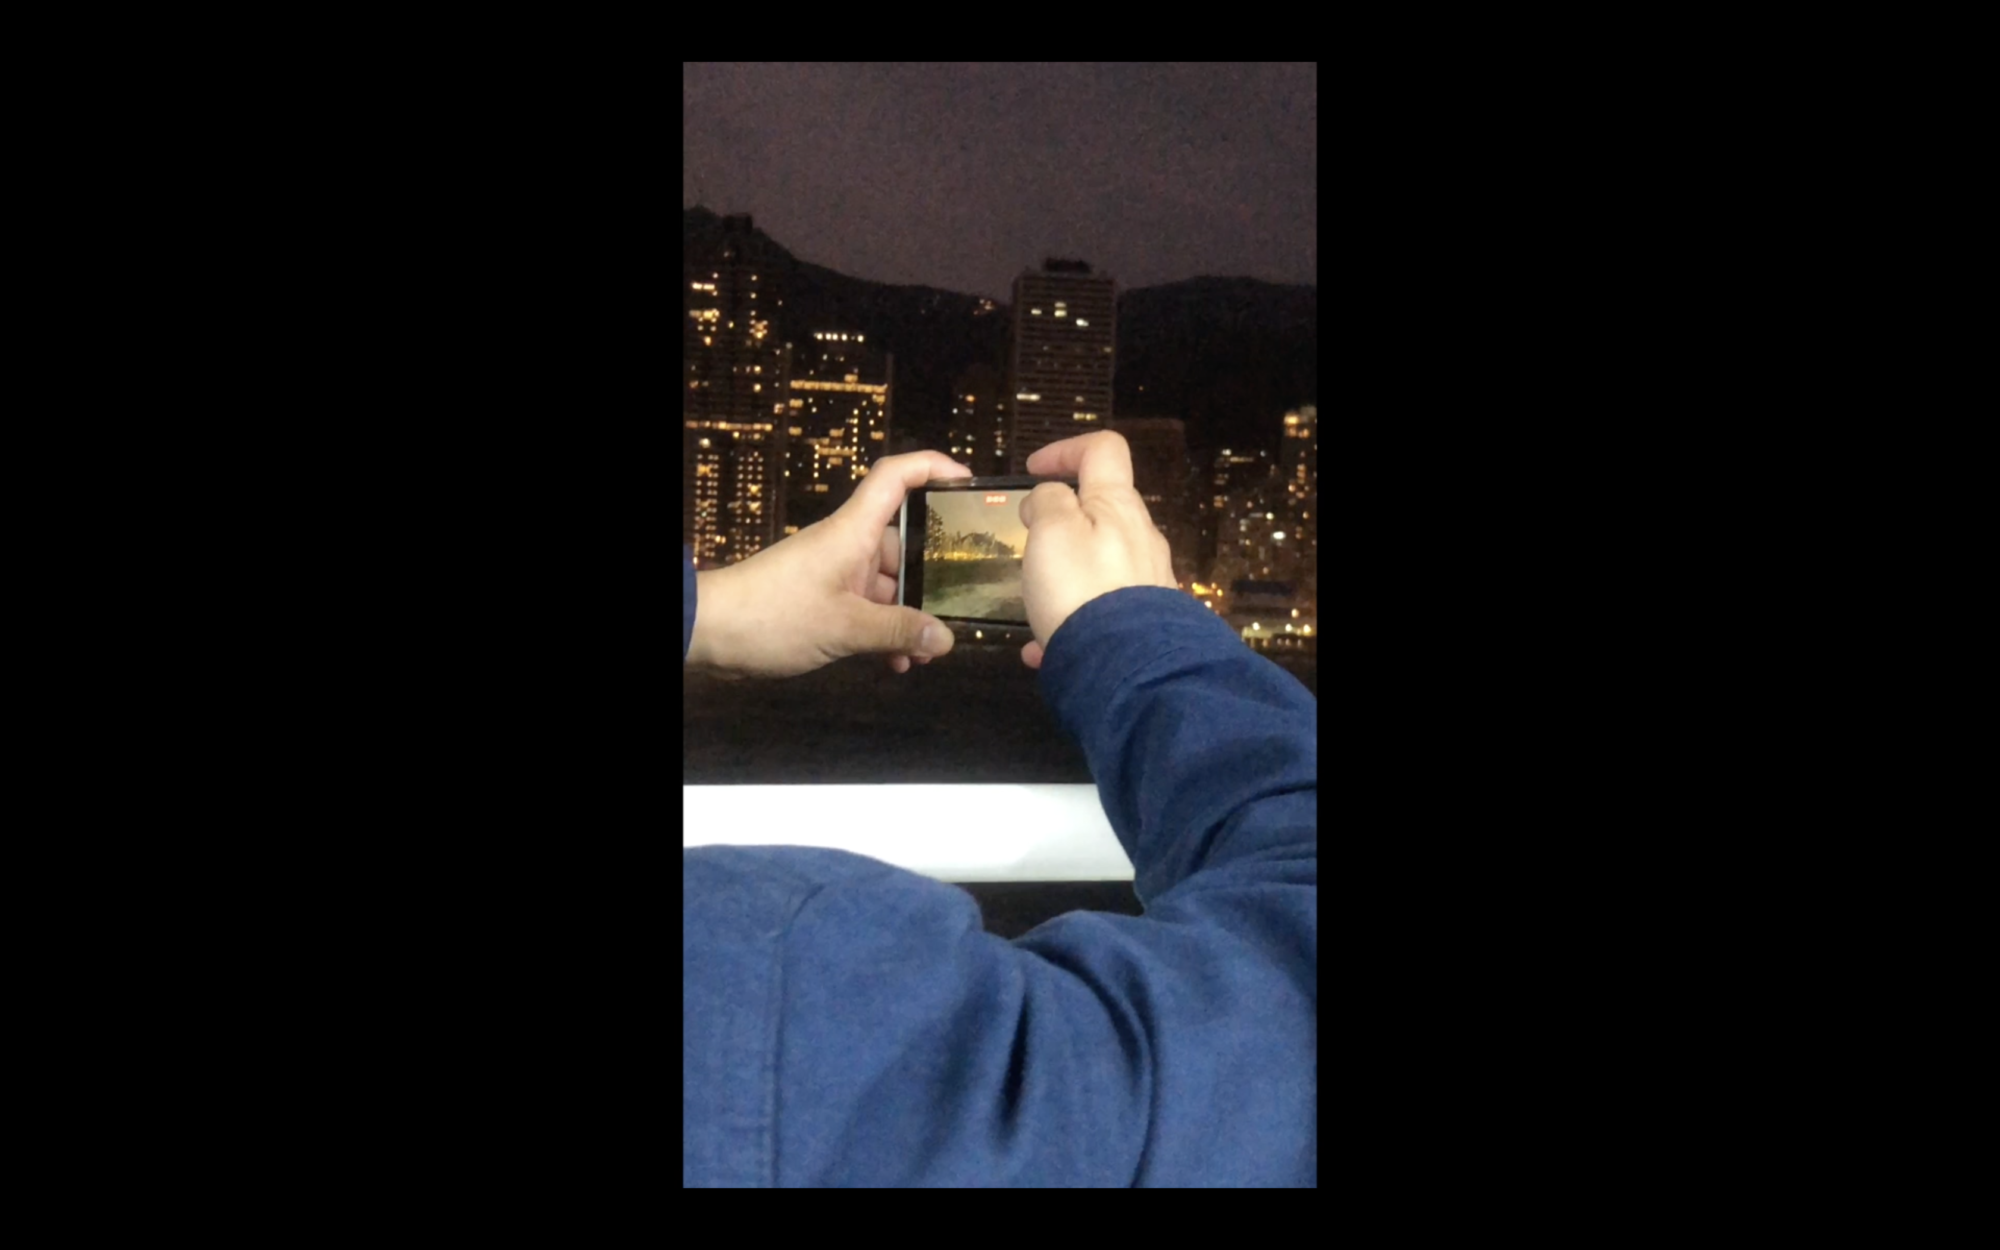 From the perspective of Sia's phone recording, we see two arms holding an iPhone over a white balcony and recording a protest scene that is offscreen to the left of frame. The skyscrapers of Hong Kong are seen in front of the person and their phone, and it appears to be dusk.